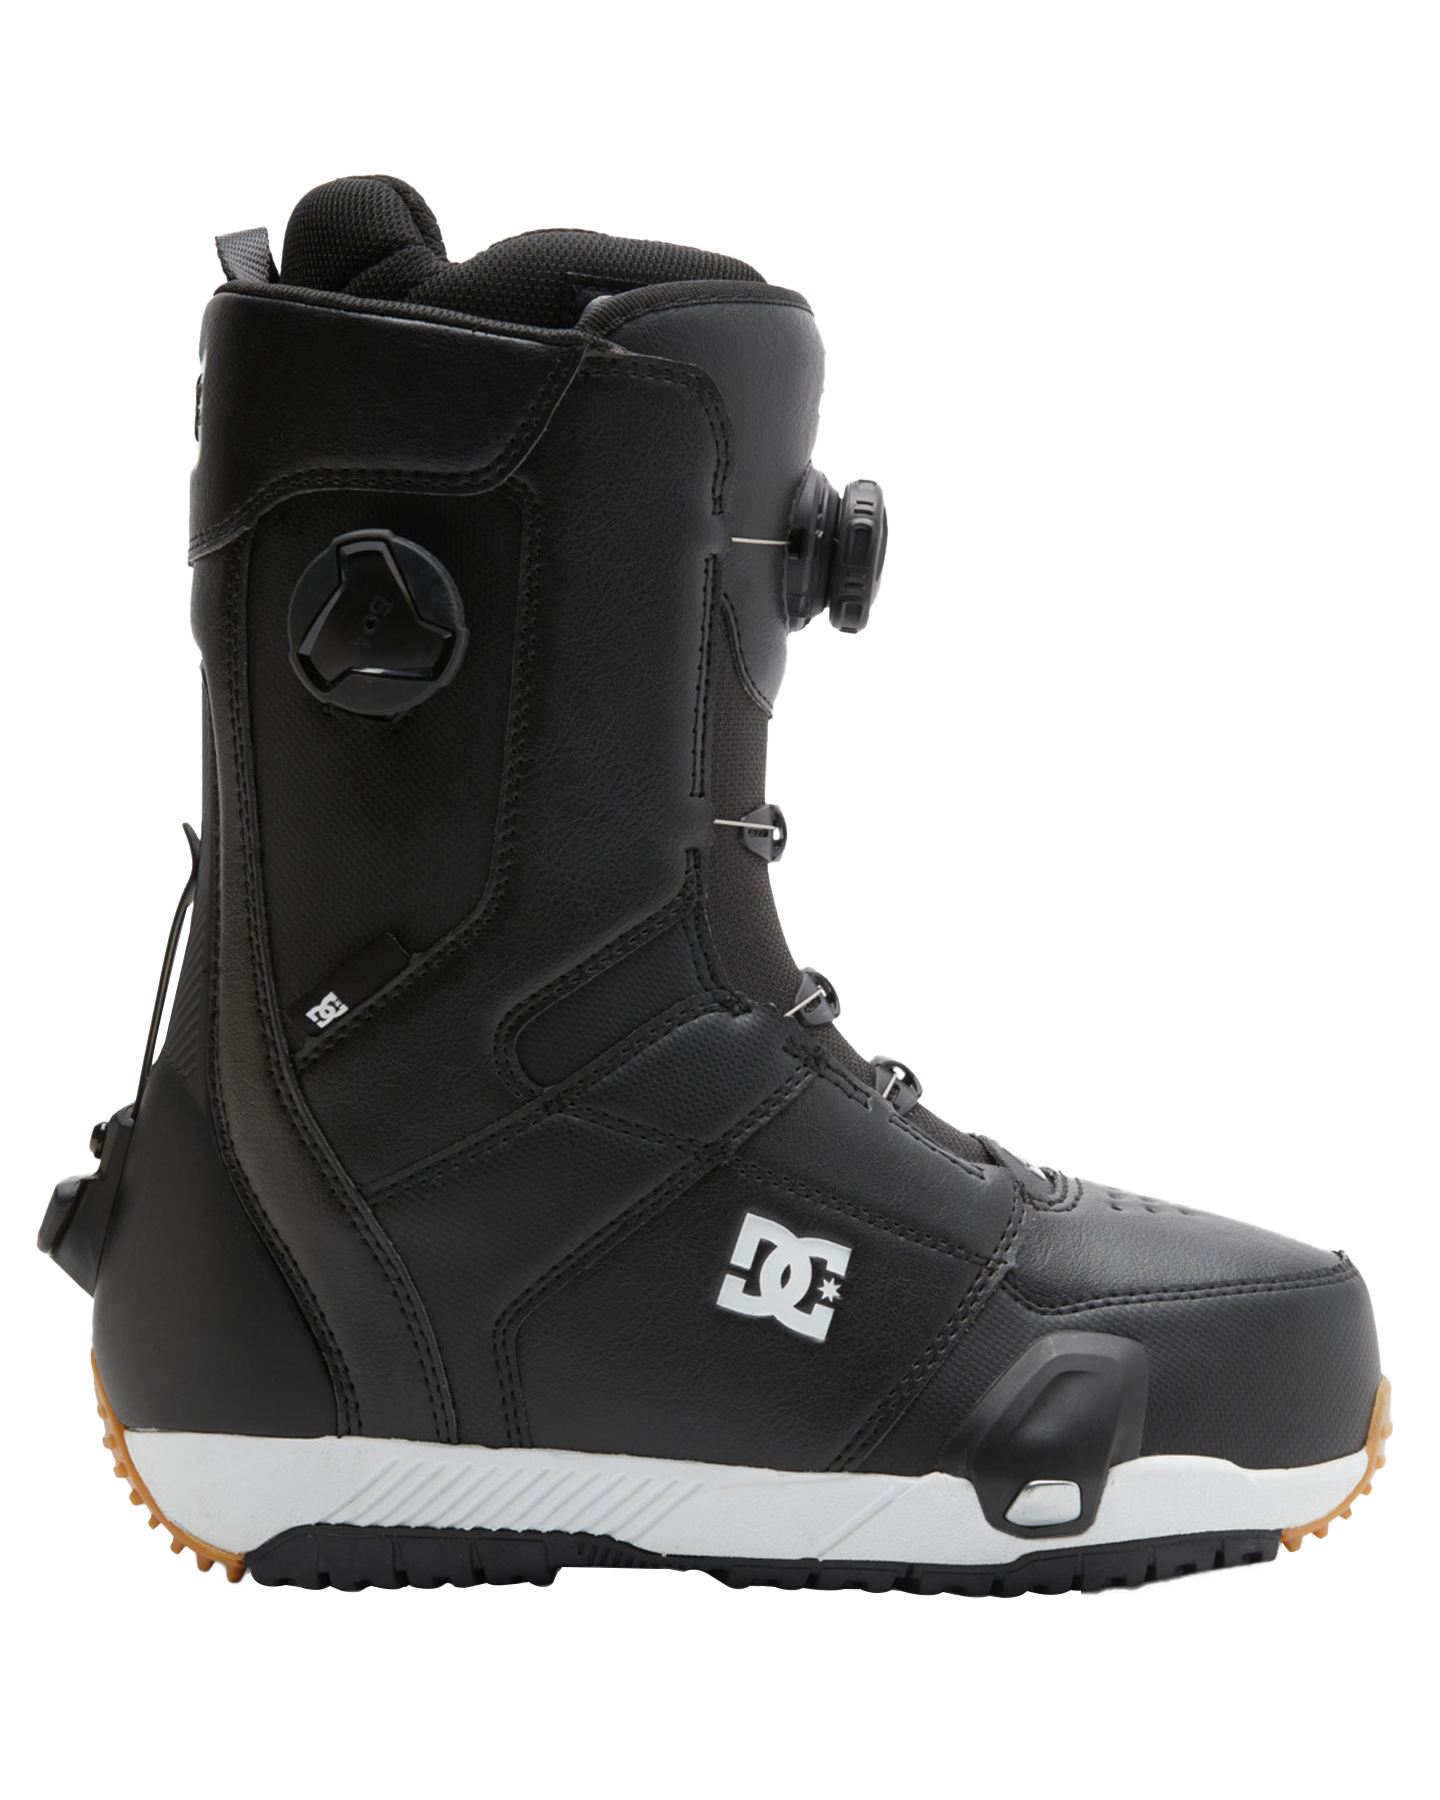 DC Men's Control Step On® Snowboard Boots - Black/White Men's Snowboard Boots - SnowSkiersWarehouse